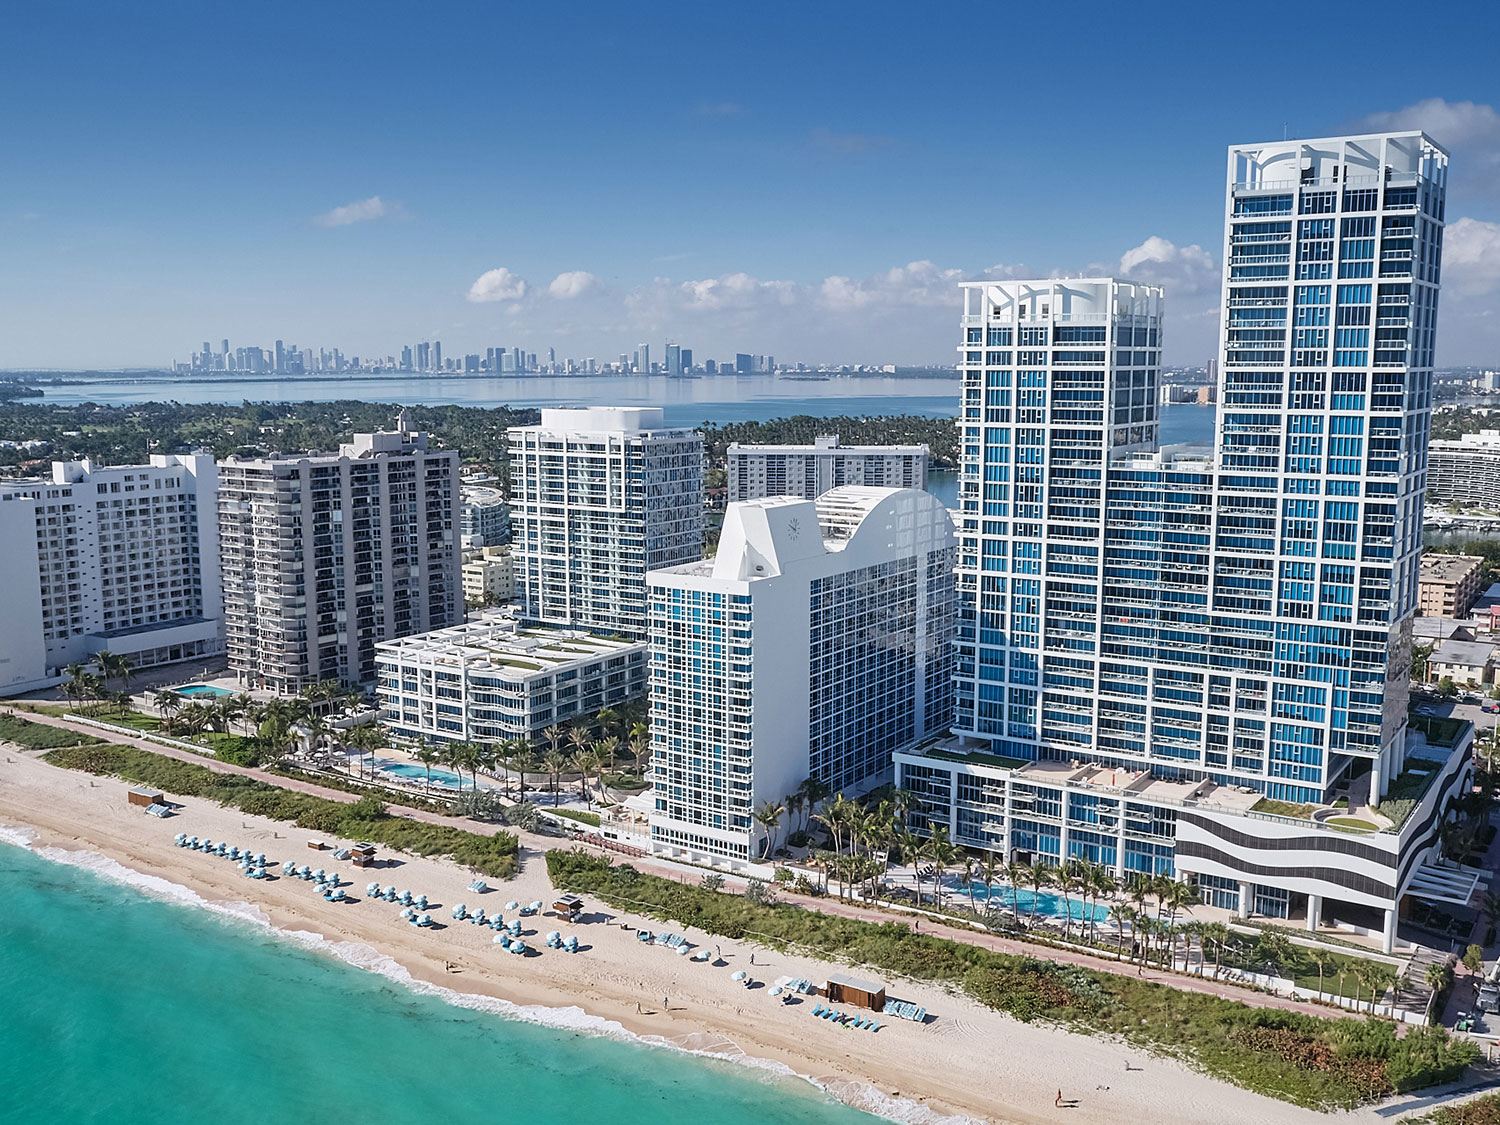 An aerial view of the Carillon Miami Wellness Resort in Miami, Florida.